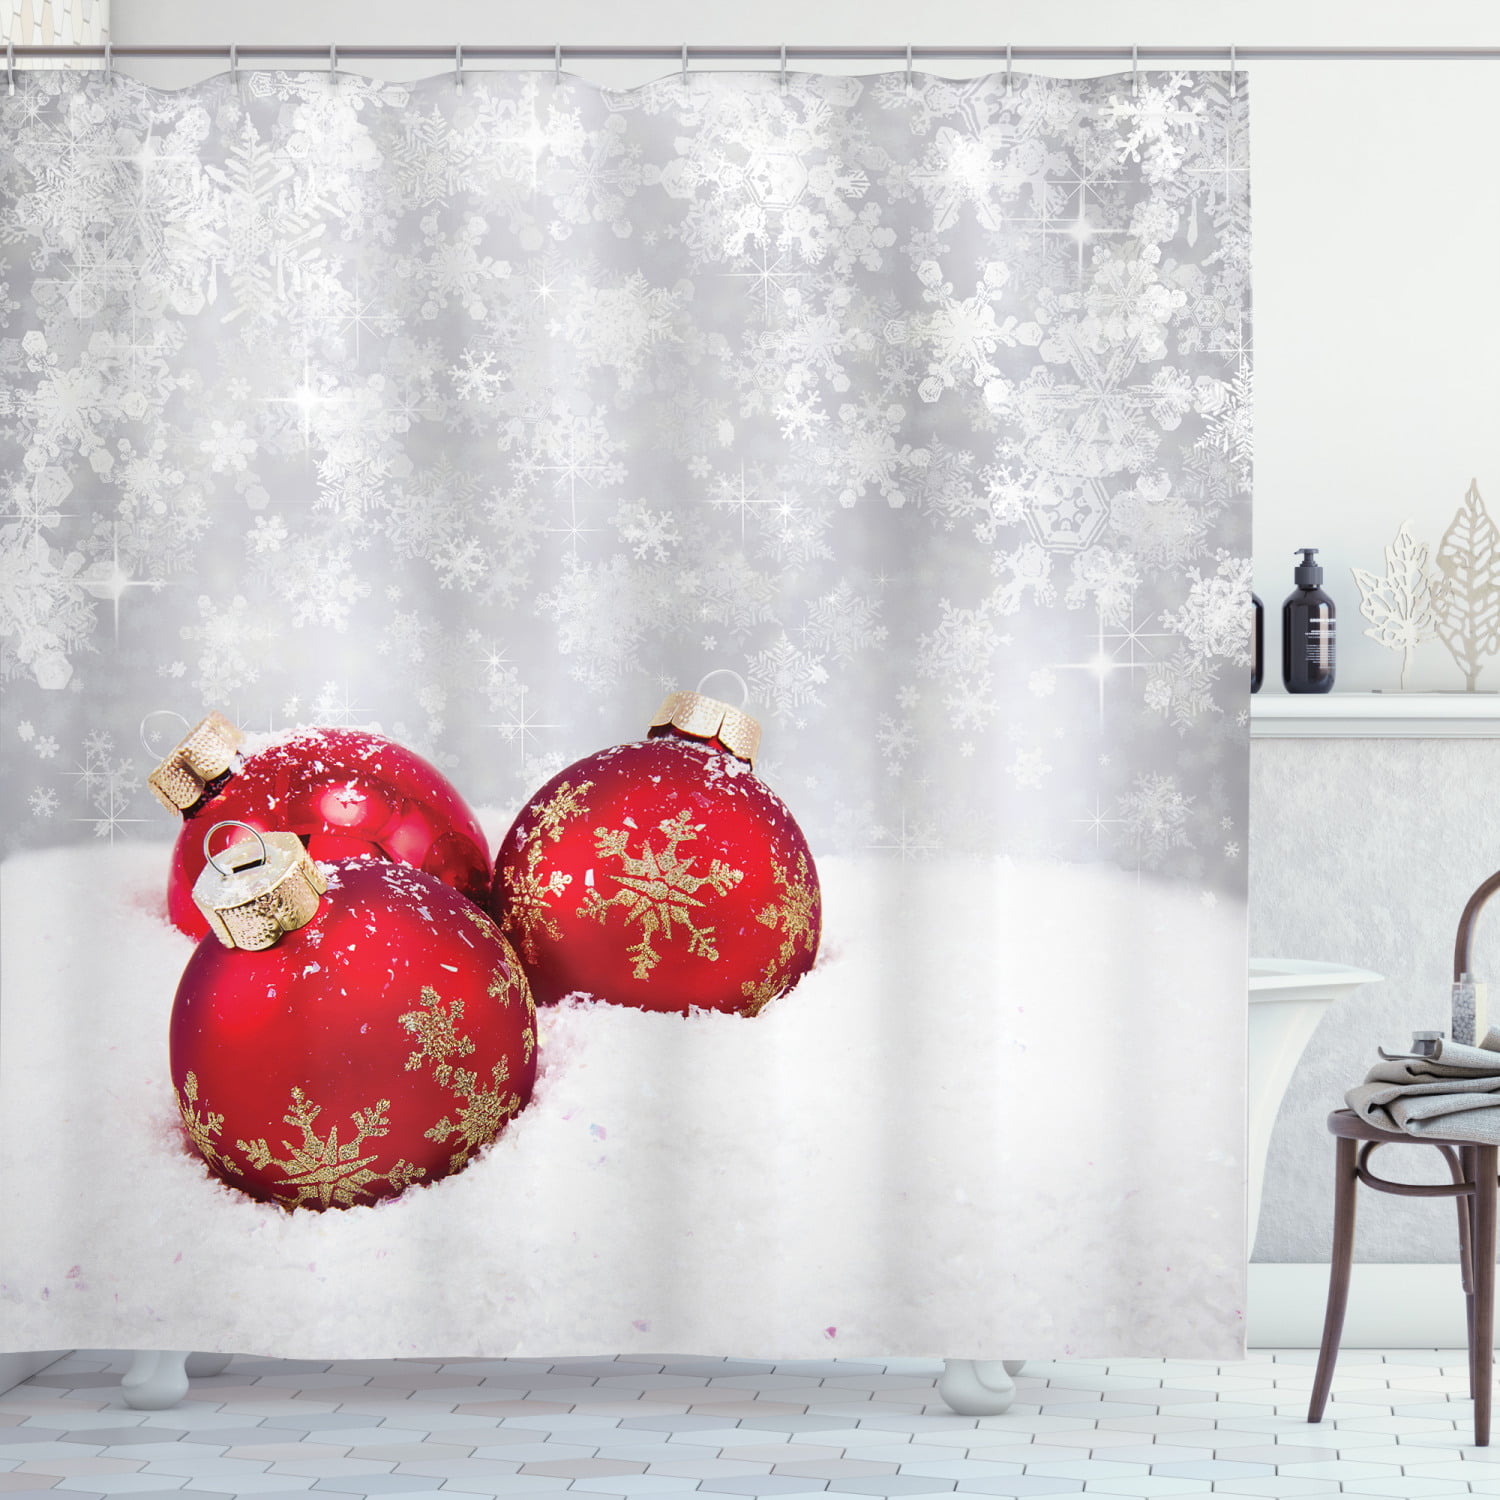 Hanging Red Christmas Tree and Snowflake White Shower Curtain Hooks Bathroom Mat 